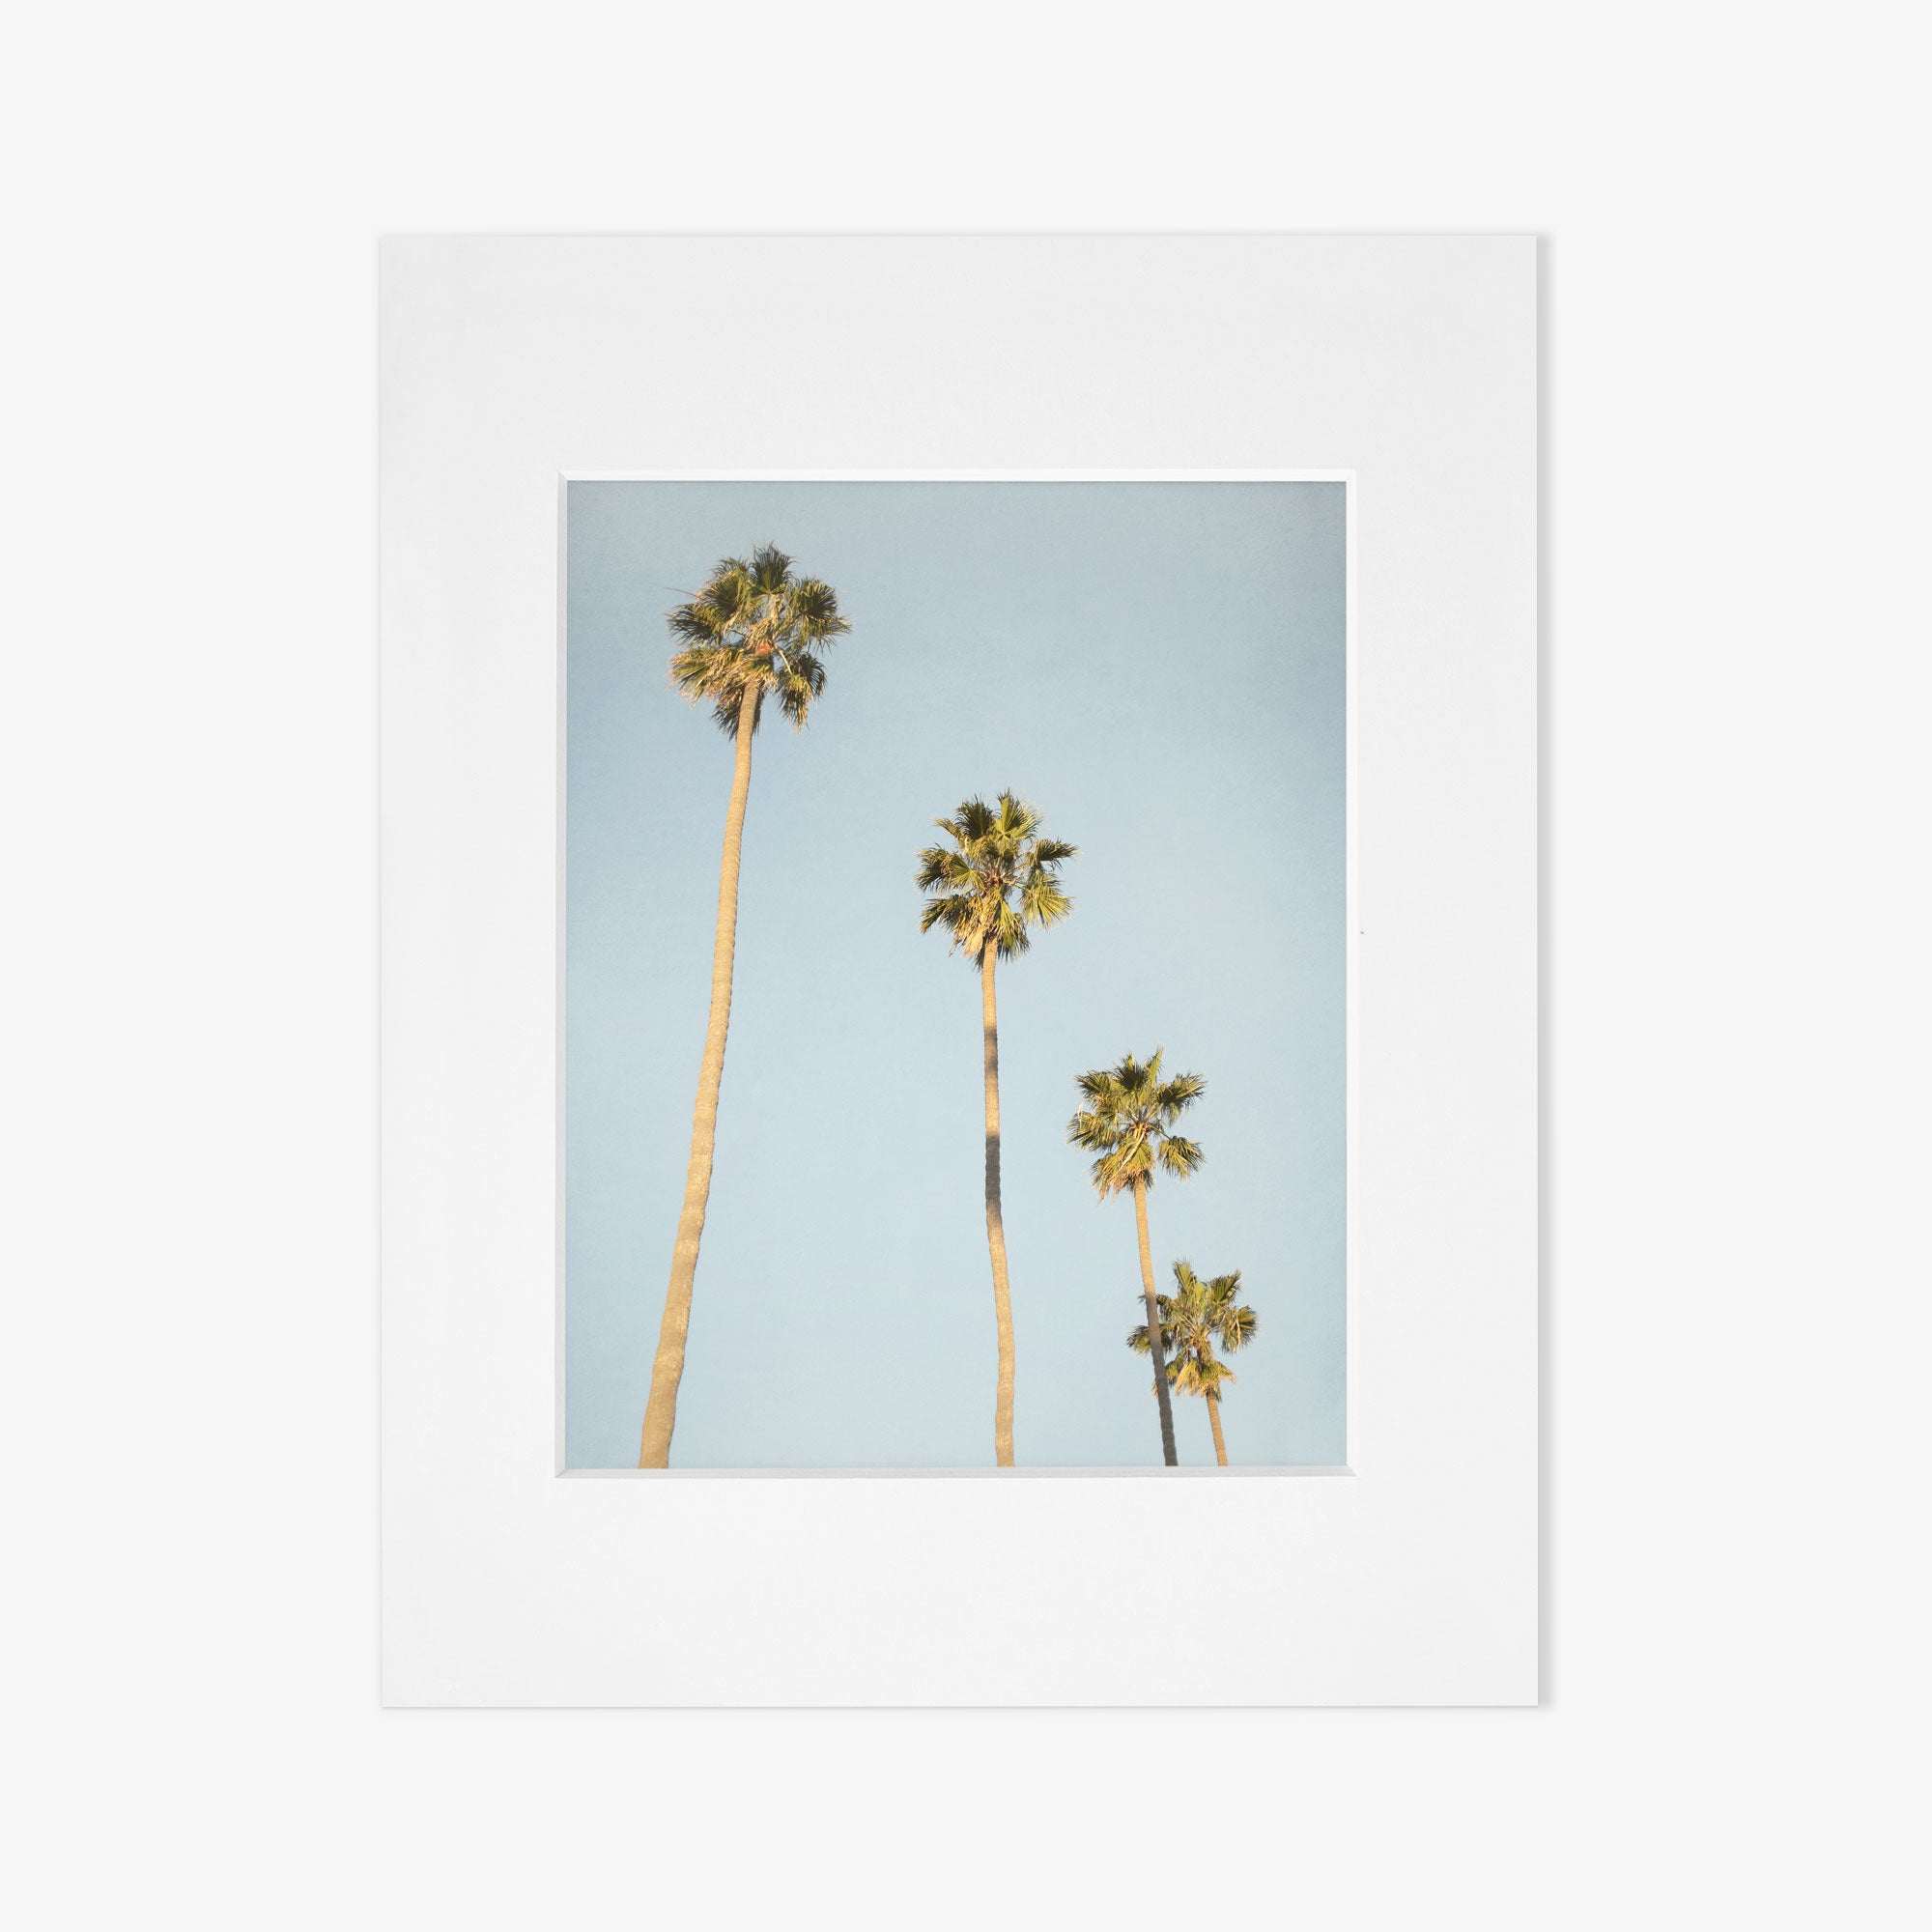 A plain white square frame with a smaller, centered grey square area featuring an Offley Green Los Angeles Palm Tree Photographic Print &#39;Palm Stairs to Heaven&#39;, set against a white background, giving a minimalist and modern appearance.